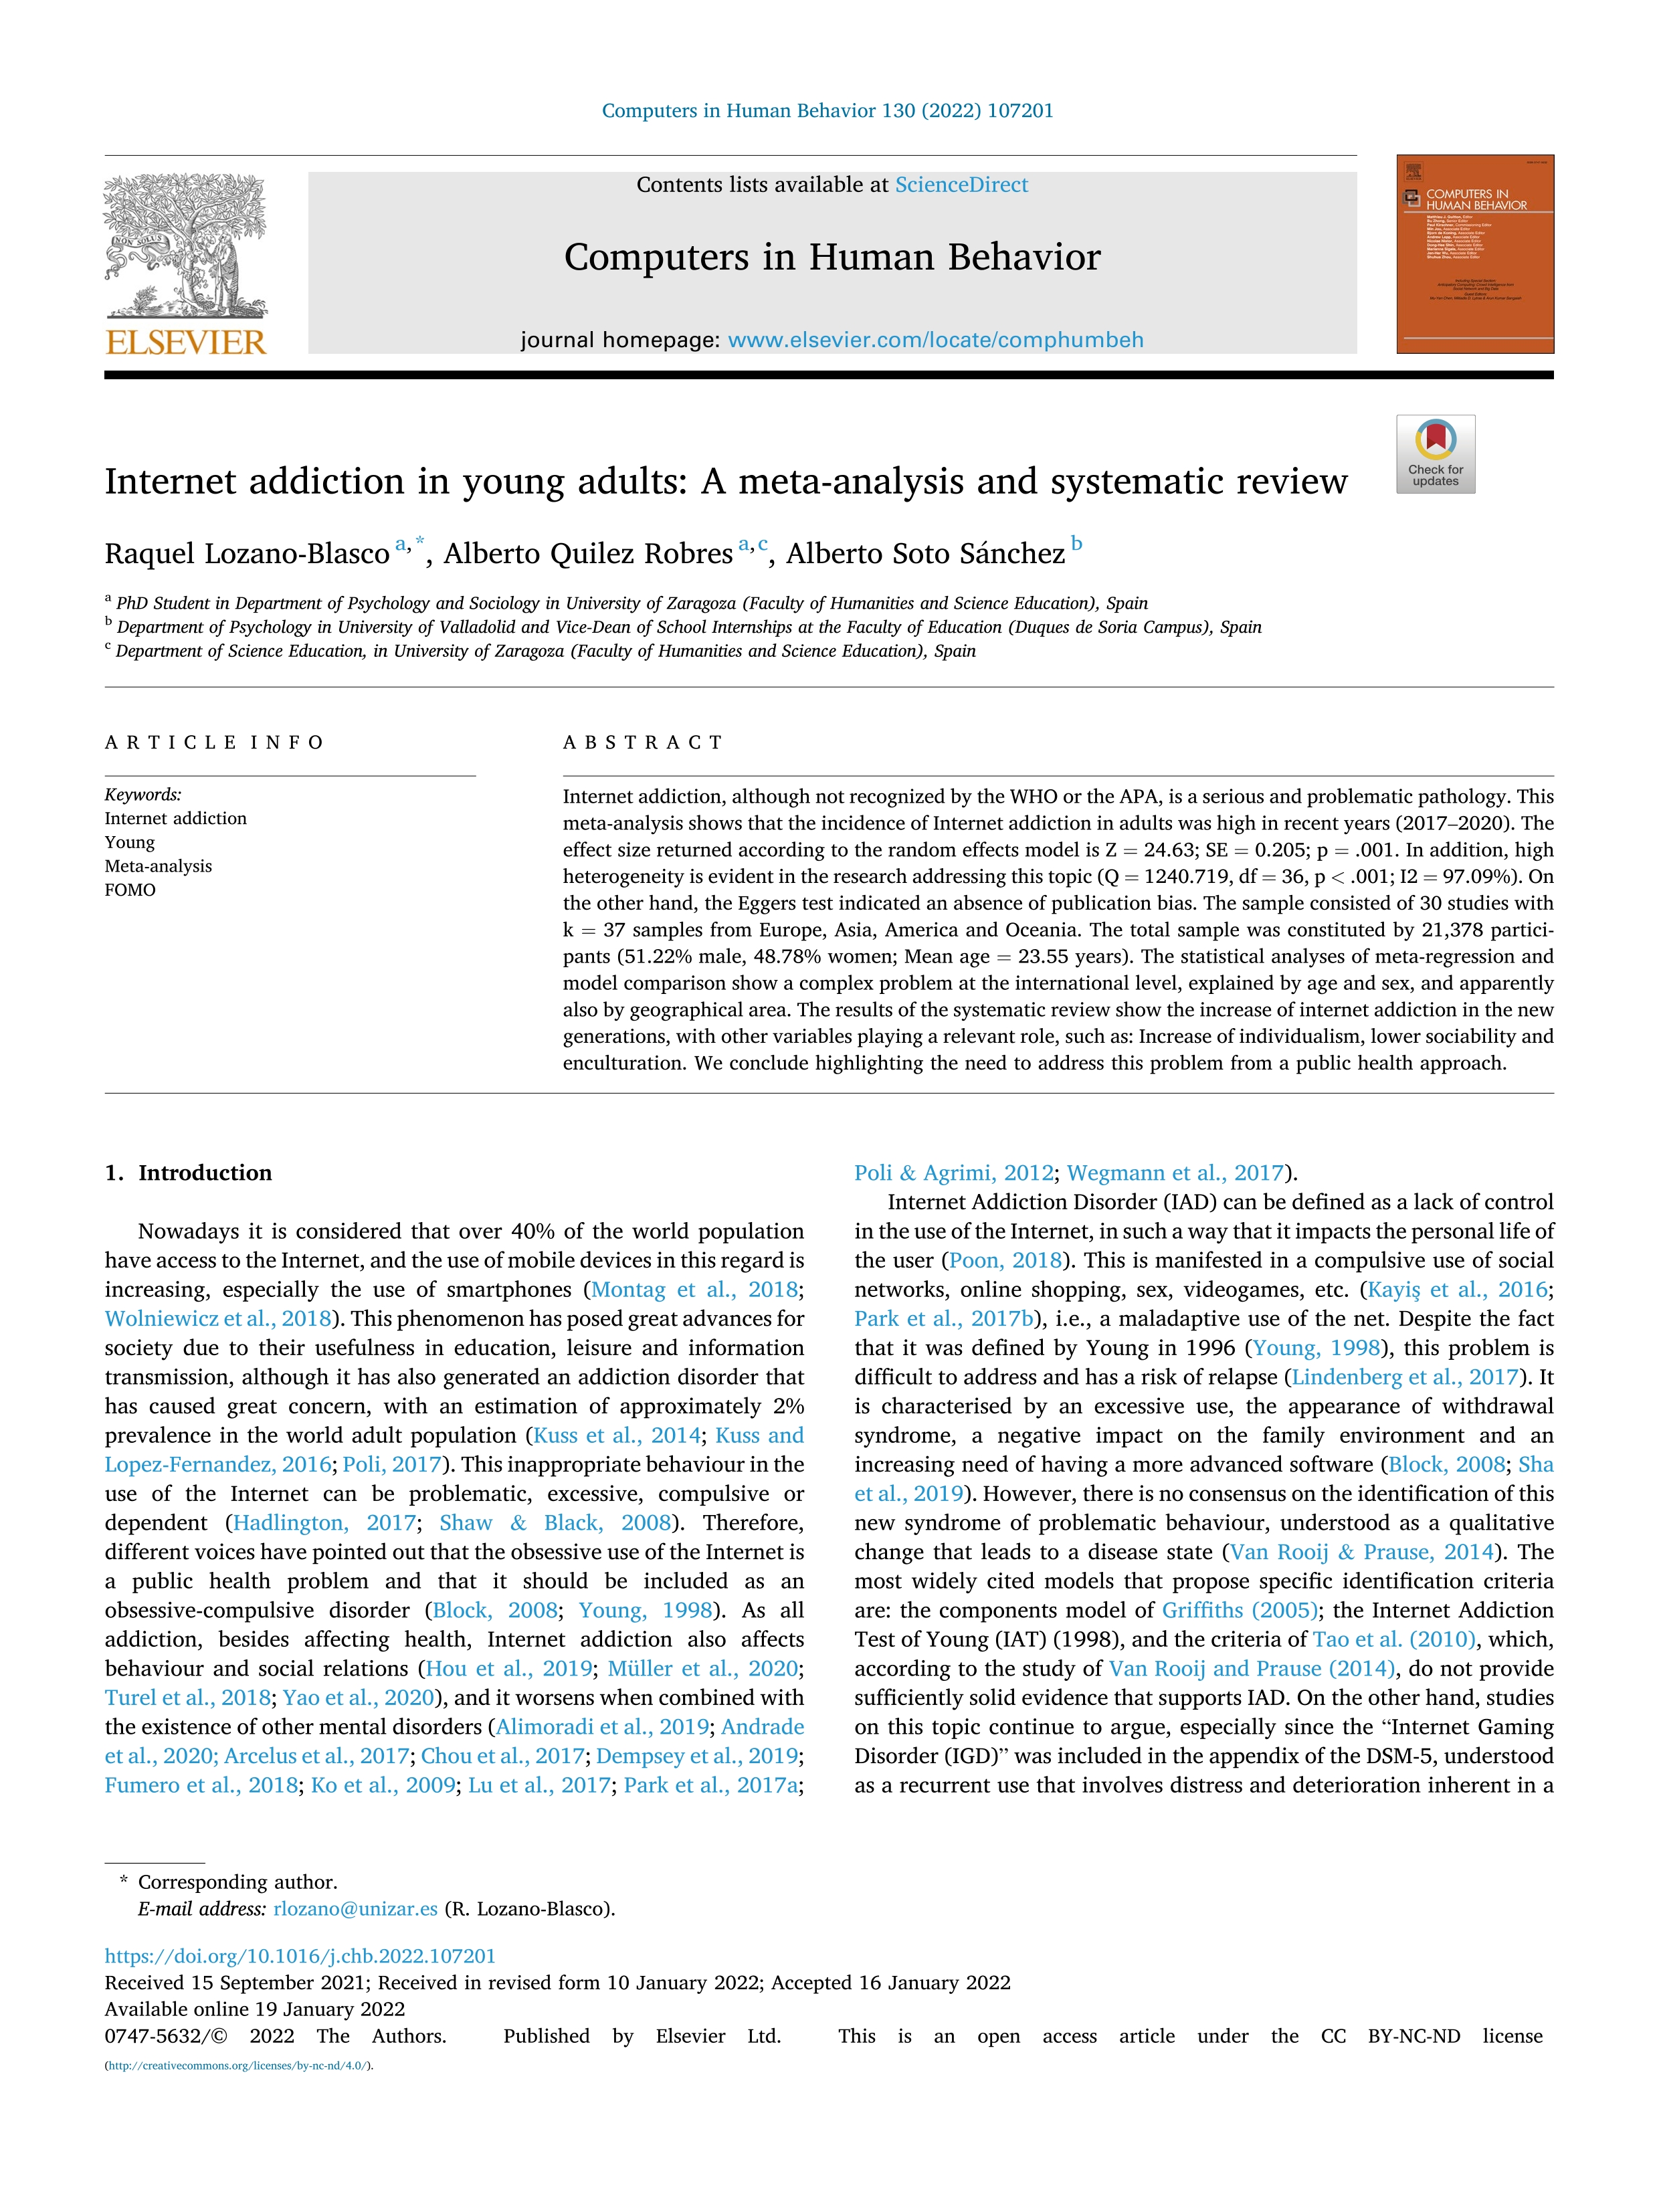 Internet addiction in young adults: A meta-analysis and systematic review